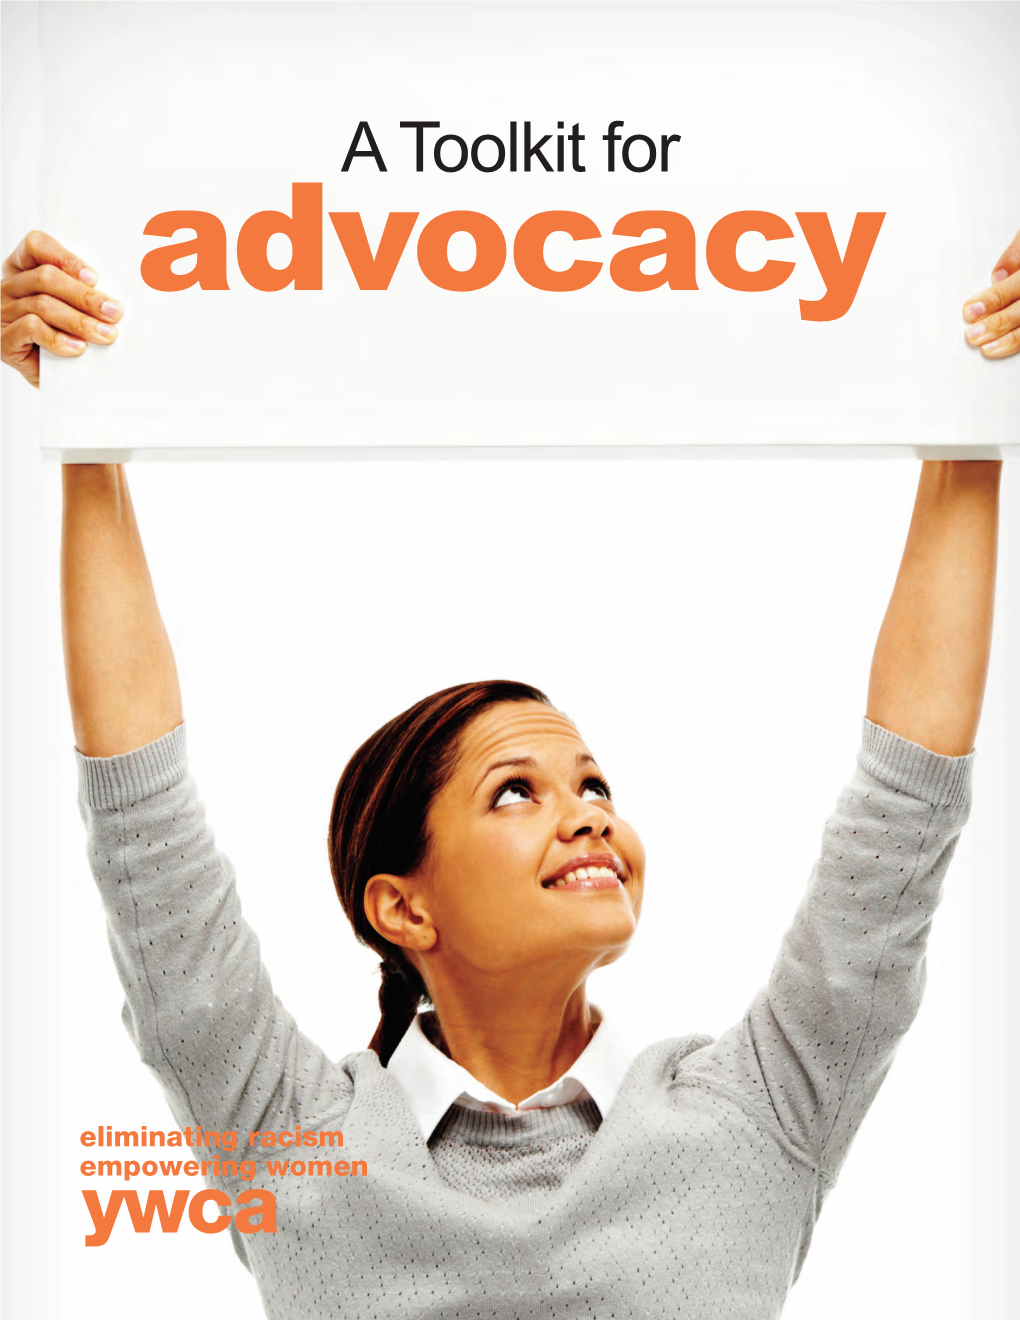 A Toolkit for Advocacy